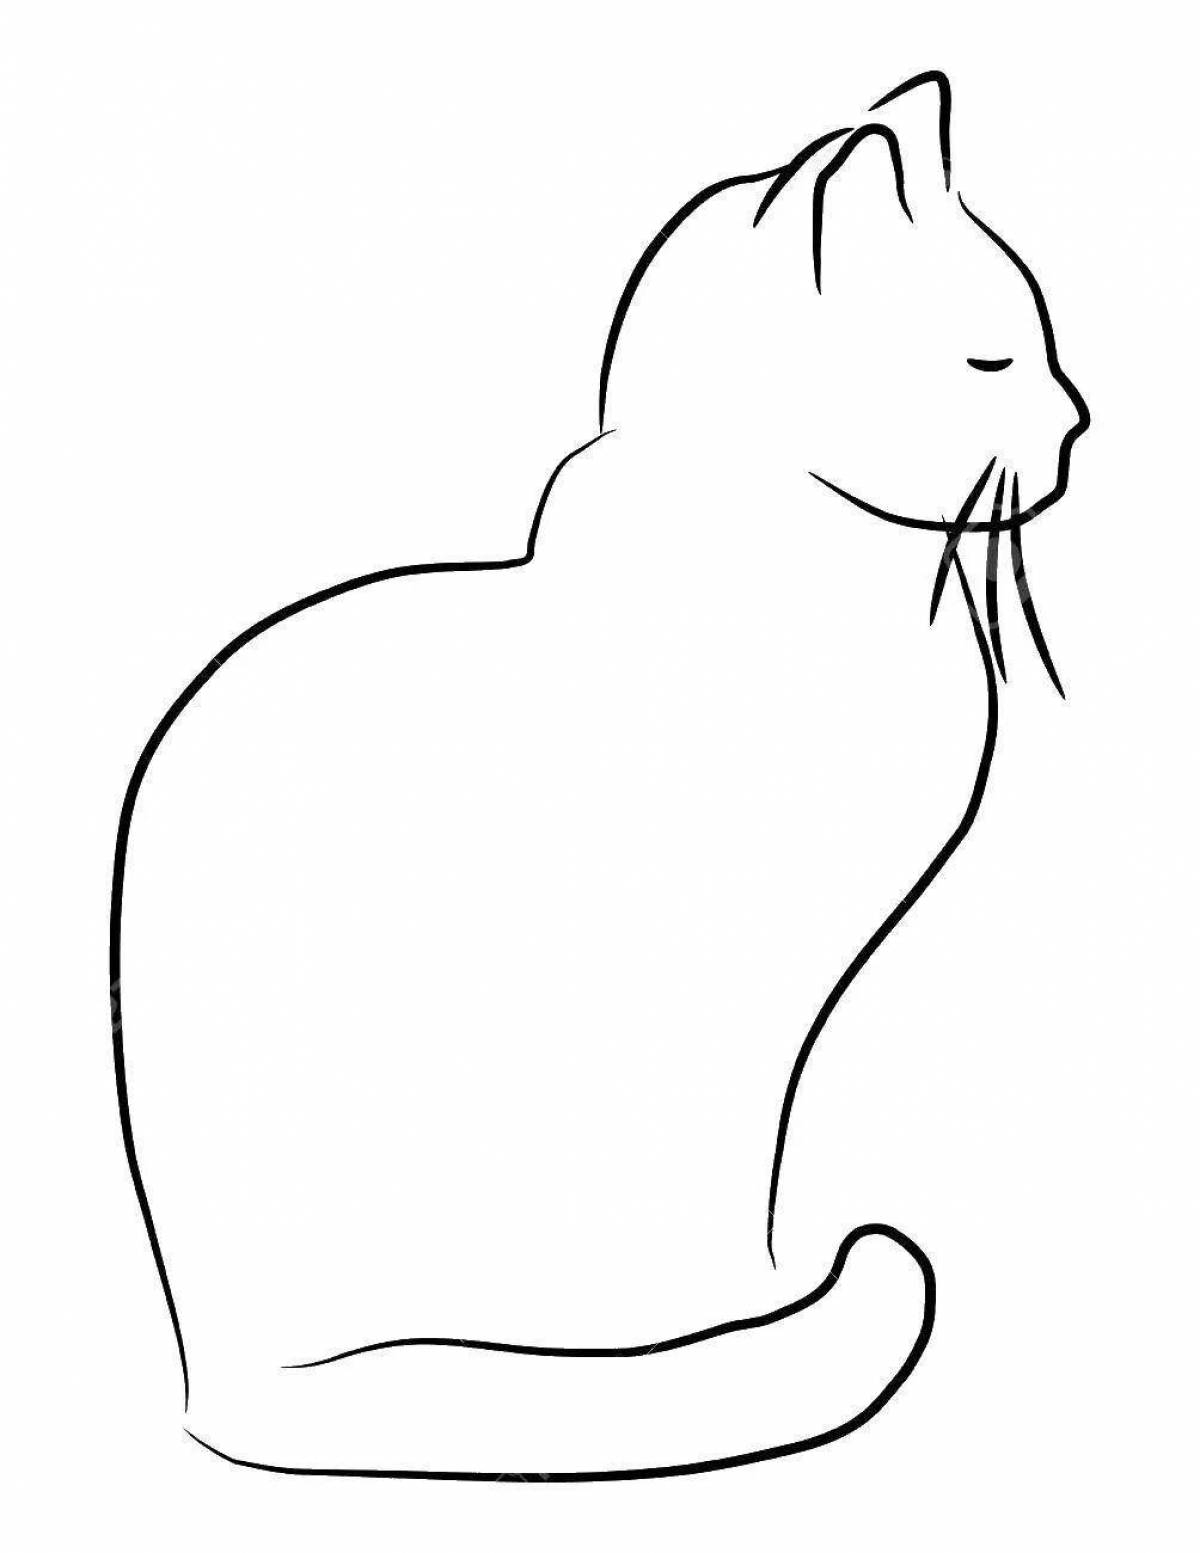 Curious sitting cat coloring page